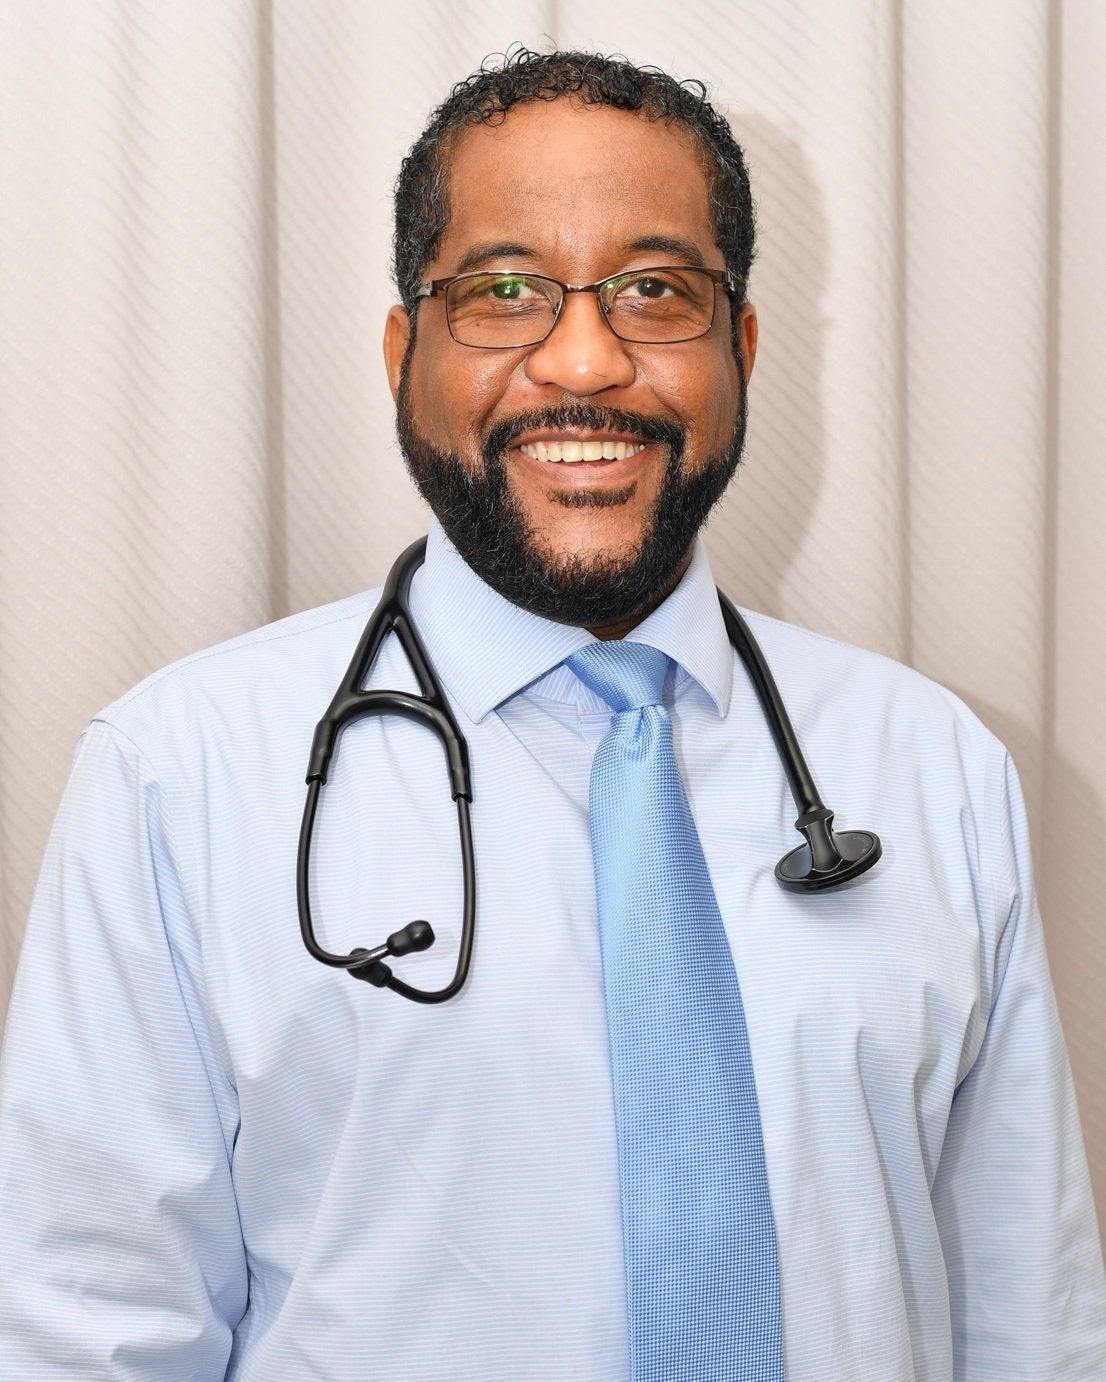 Dr. Ricky D. Mitchell